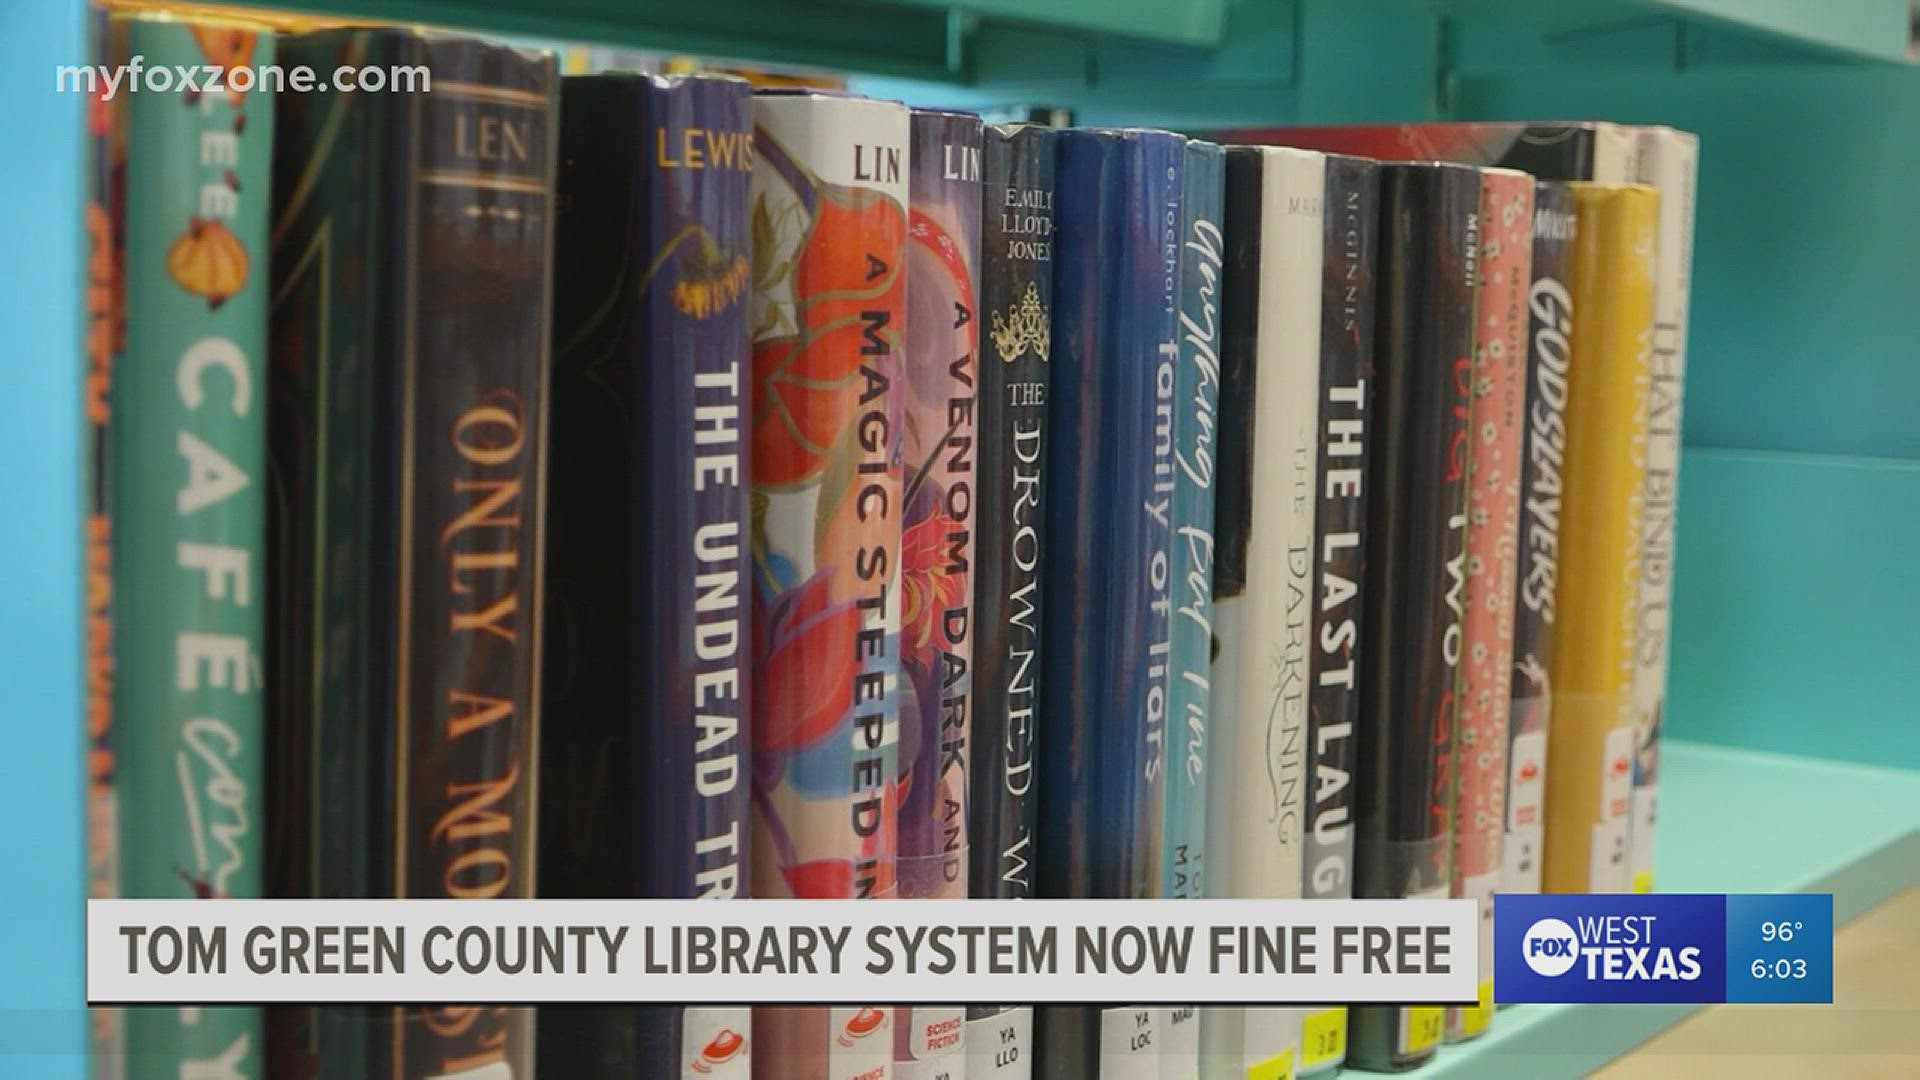 With inflation soaring, Americans are keeping an eye on their wallets. Some will have one less thing to worry about at the Tom Green County Library System.